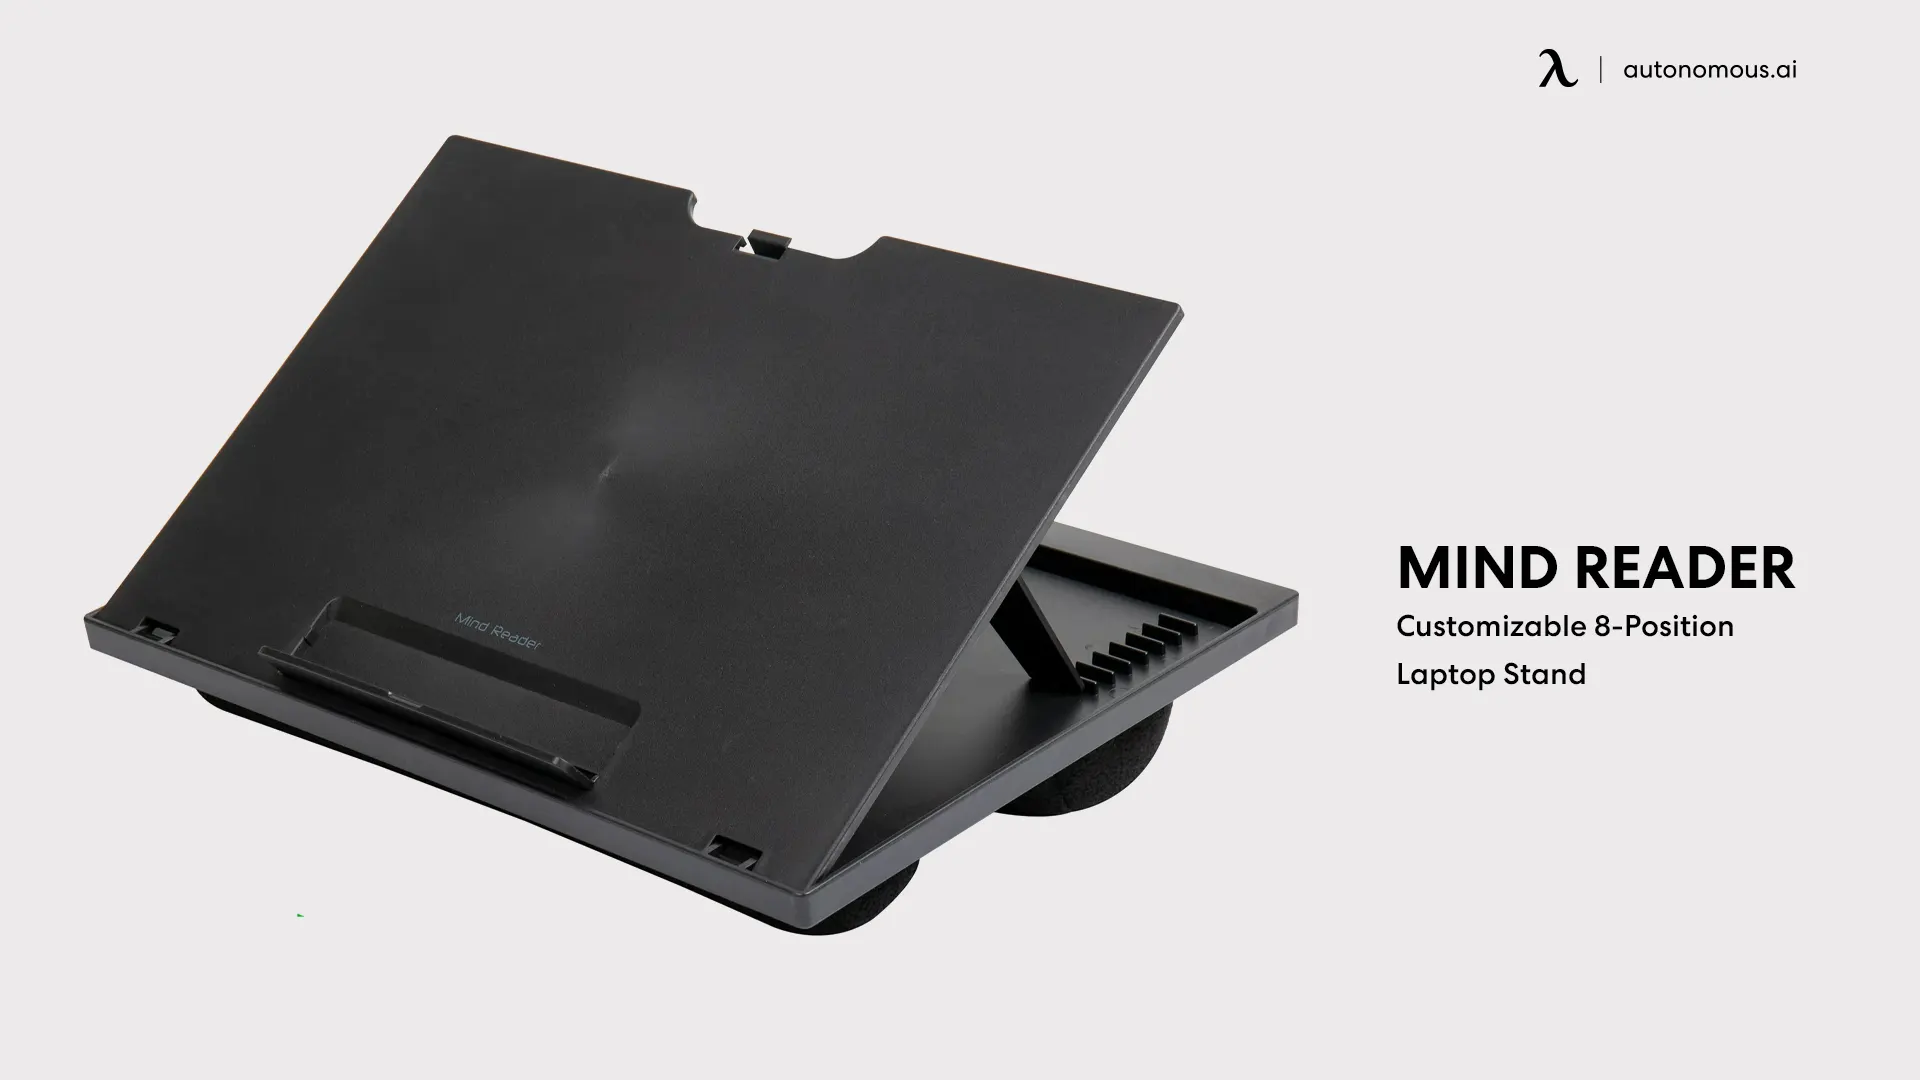 Customizable 8-Position Laptop Stand by Mind Reader